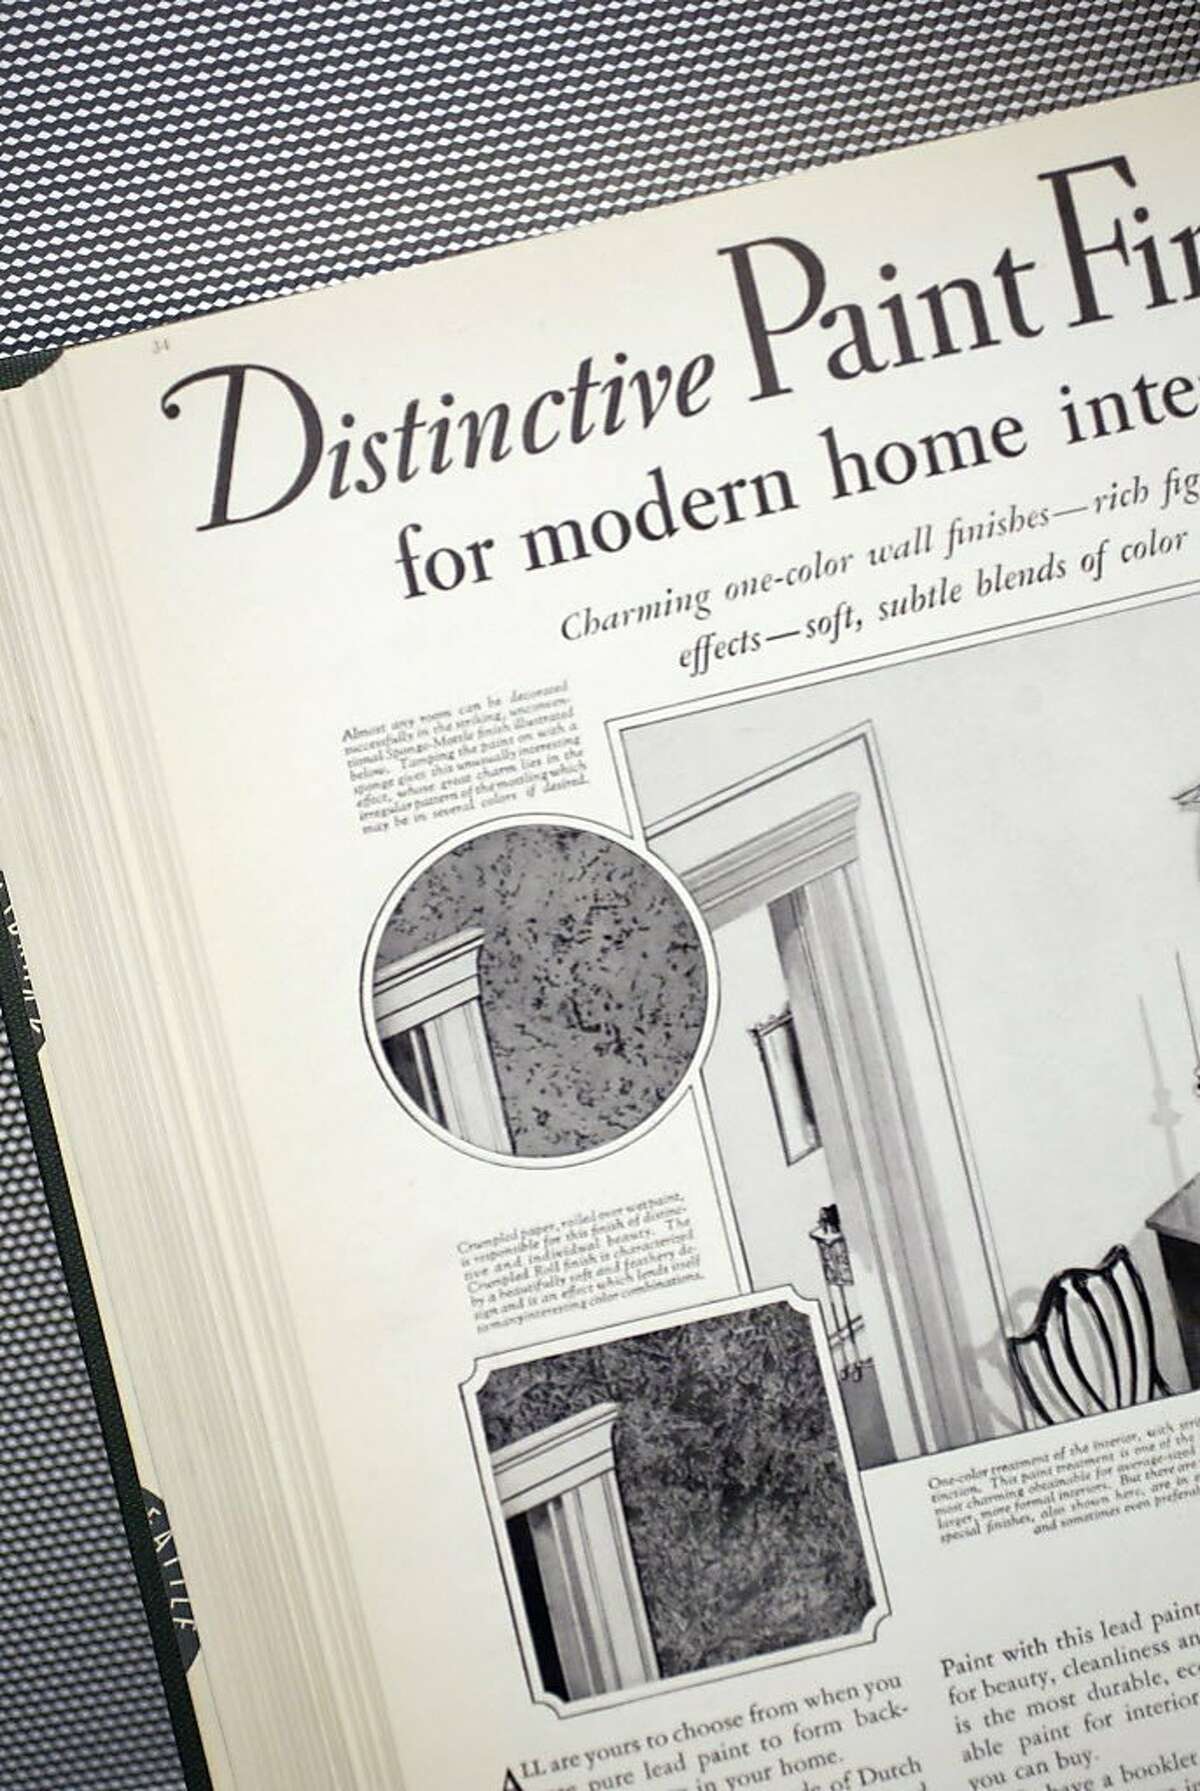 An ad for Dutch Boy white lead paint shares modern paint finishing techniques in the House and Gardens October, 1927 issue, found at the downtown branch of the Seattle Public Library Monday, March 19, 2007. (Andy Rogers/Seattle Post-Intelligencer)